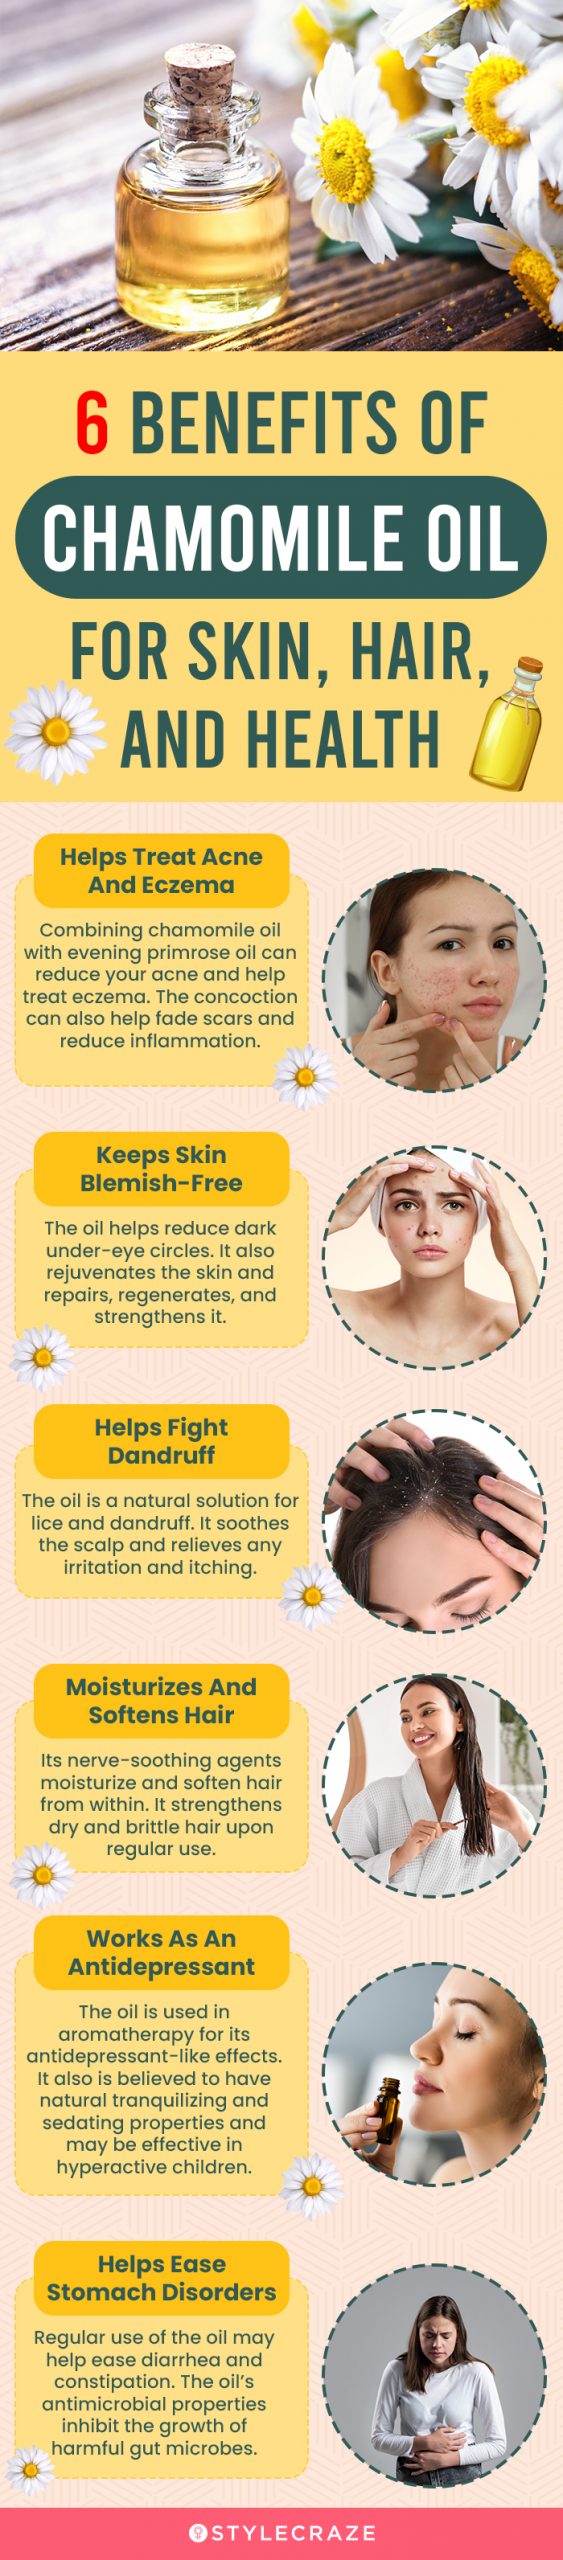 6 benefits of chamomile oil for skin, hair, and health (infographic)